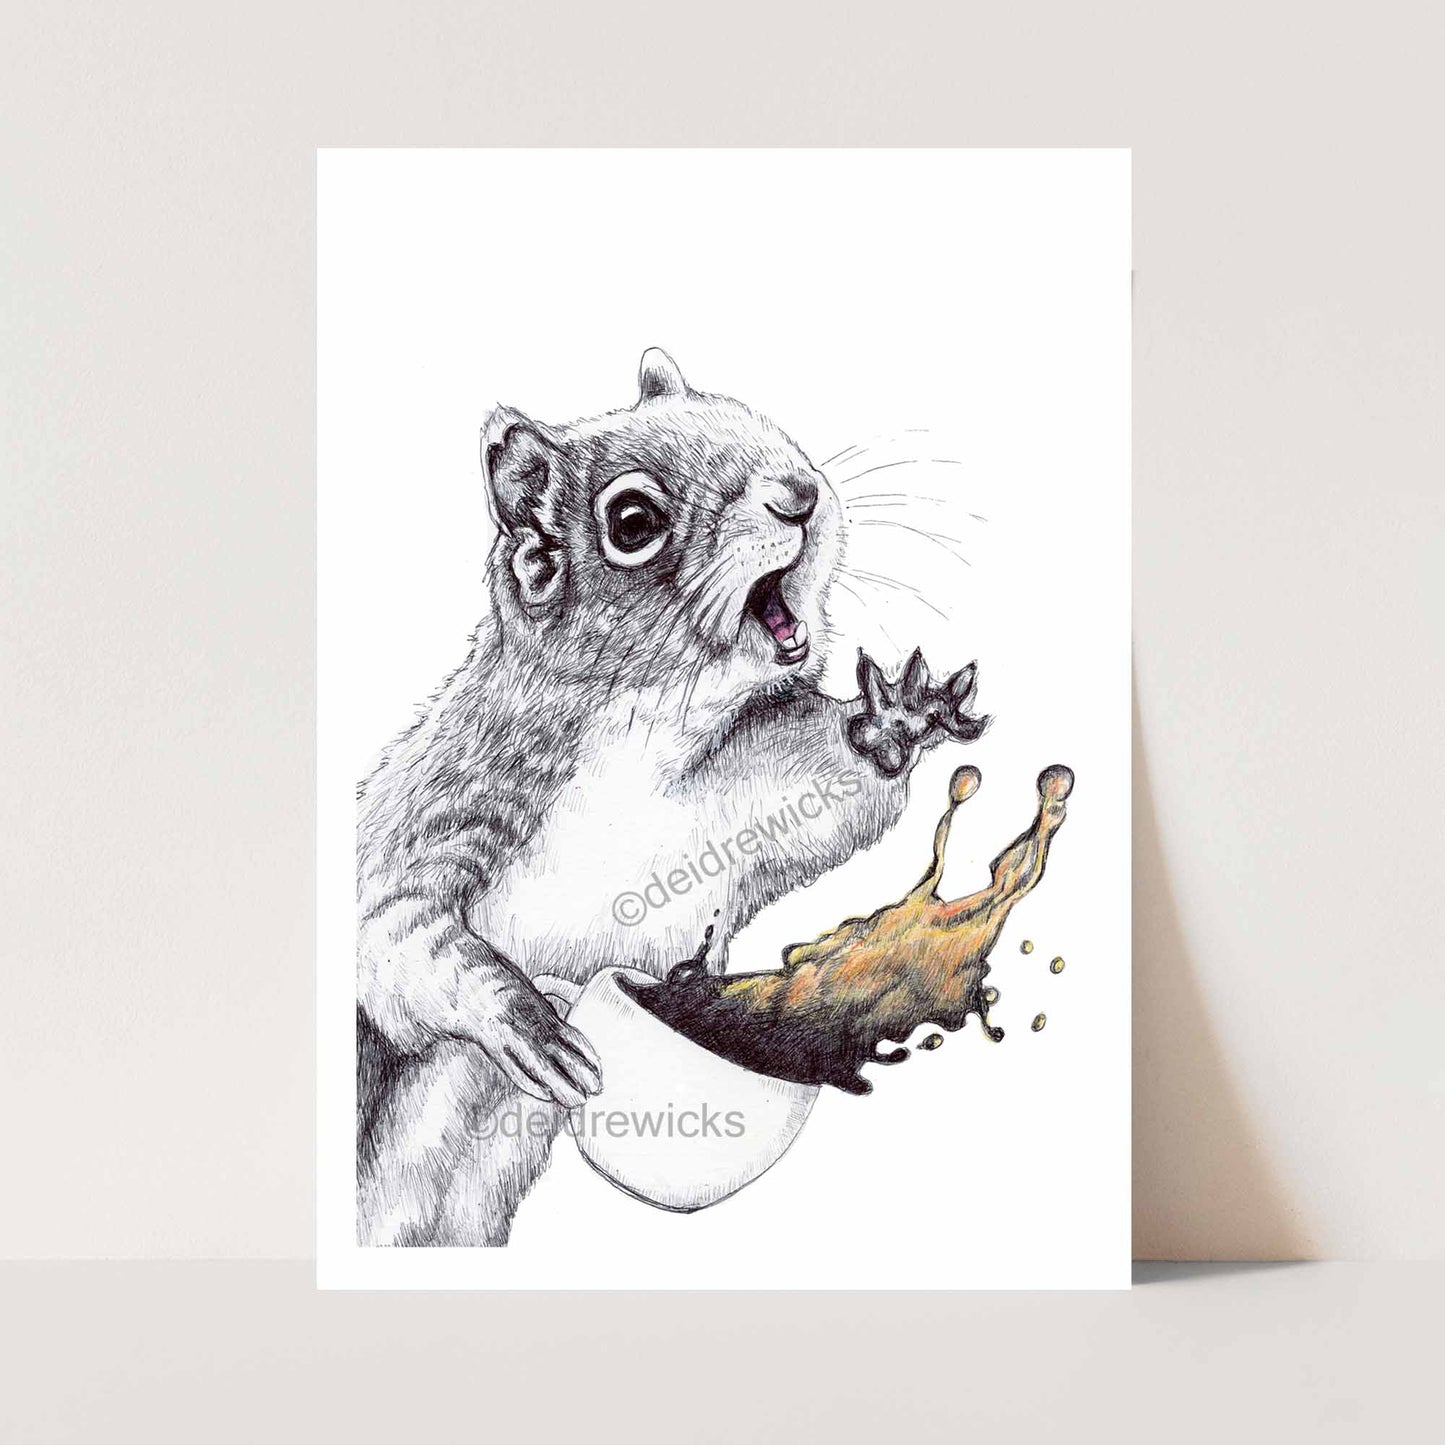 Print of an original ballpoint pen illustration of a squirrel about to spill it's coffee. It's a disaster! By Deidre Wicks